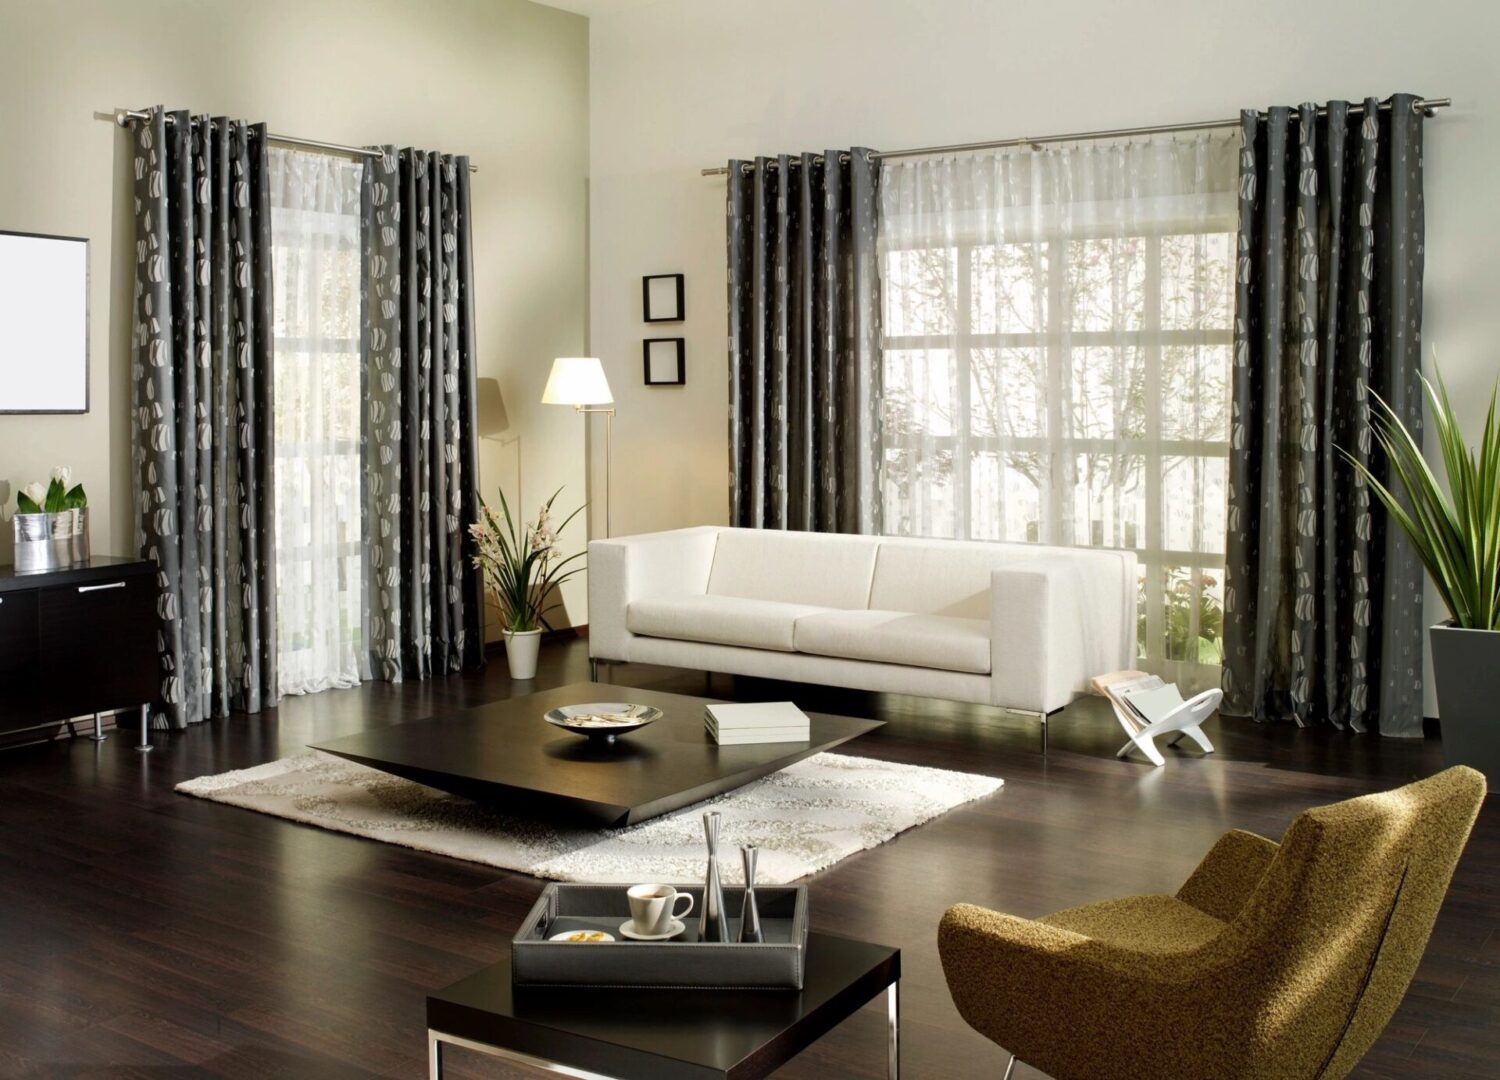 A living room with dark wood floors and white furniture.